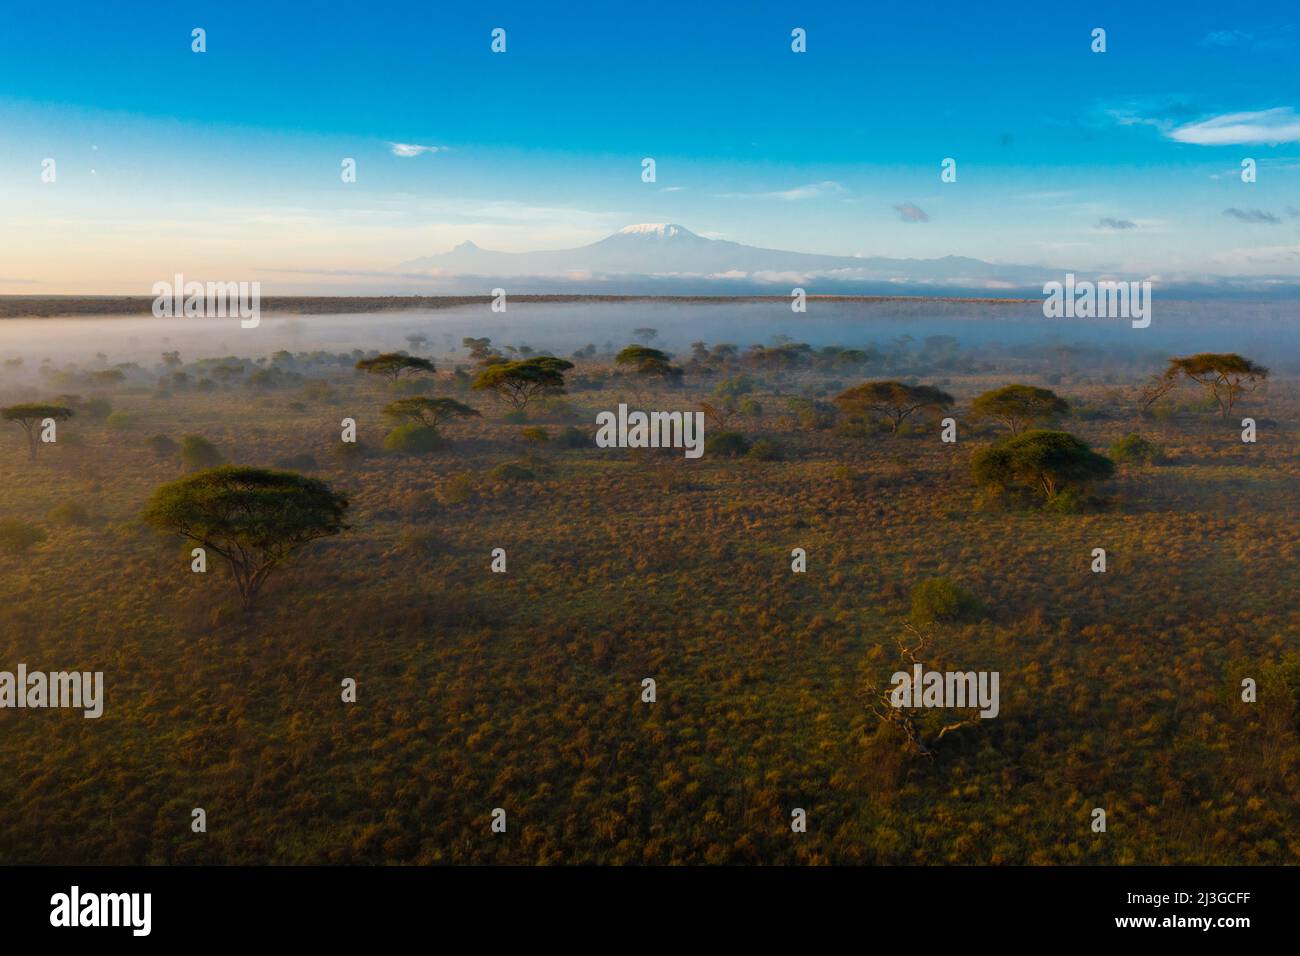 Aerial view of savannah grassland with acacia trees and mist with Mt. Kilimanjaro in distance, blue skies Stock Photo